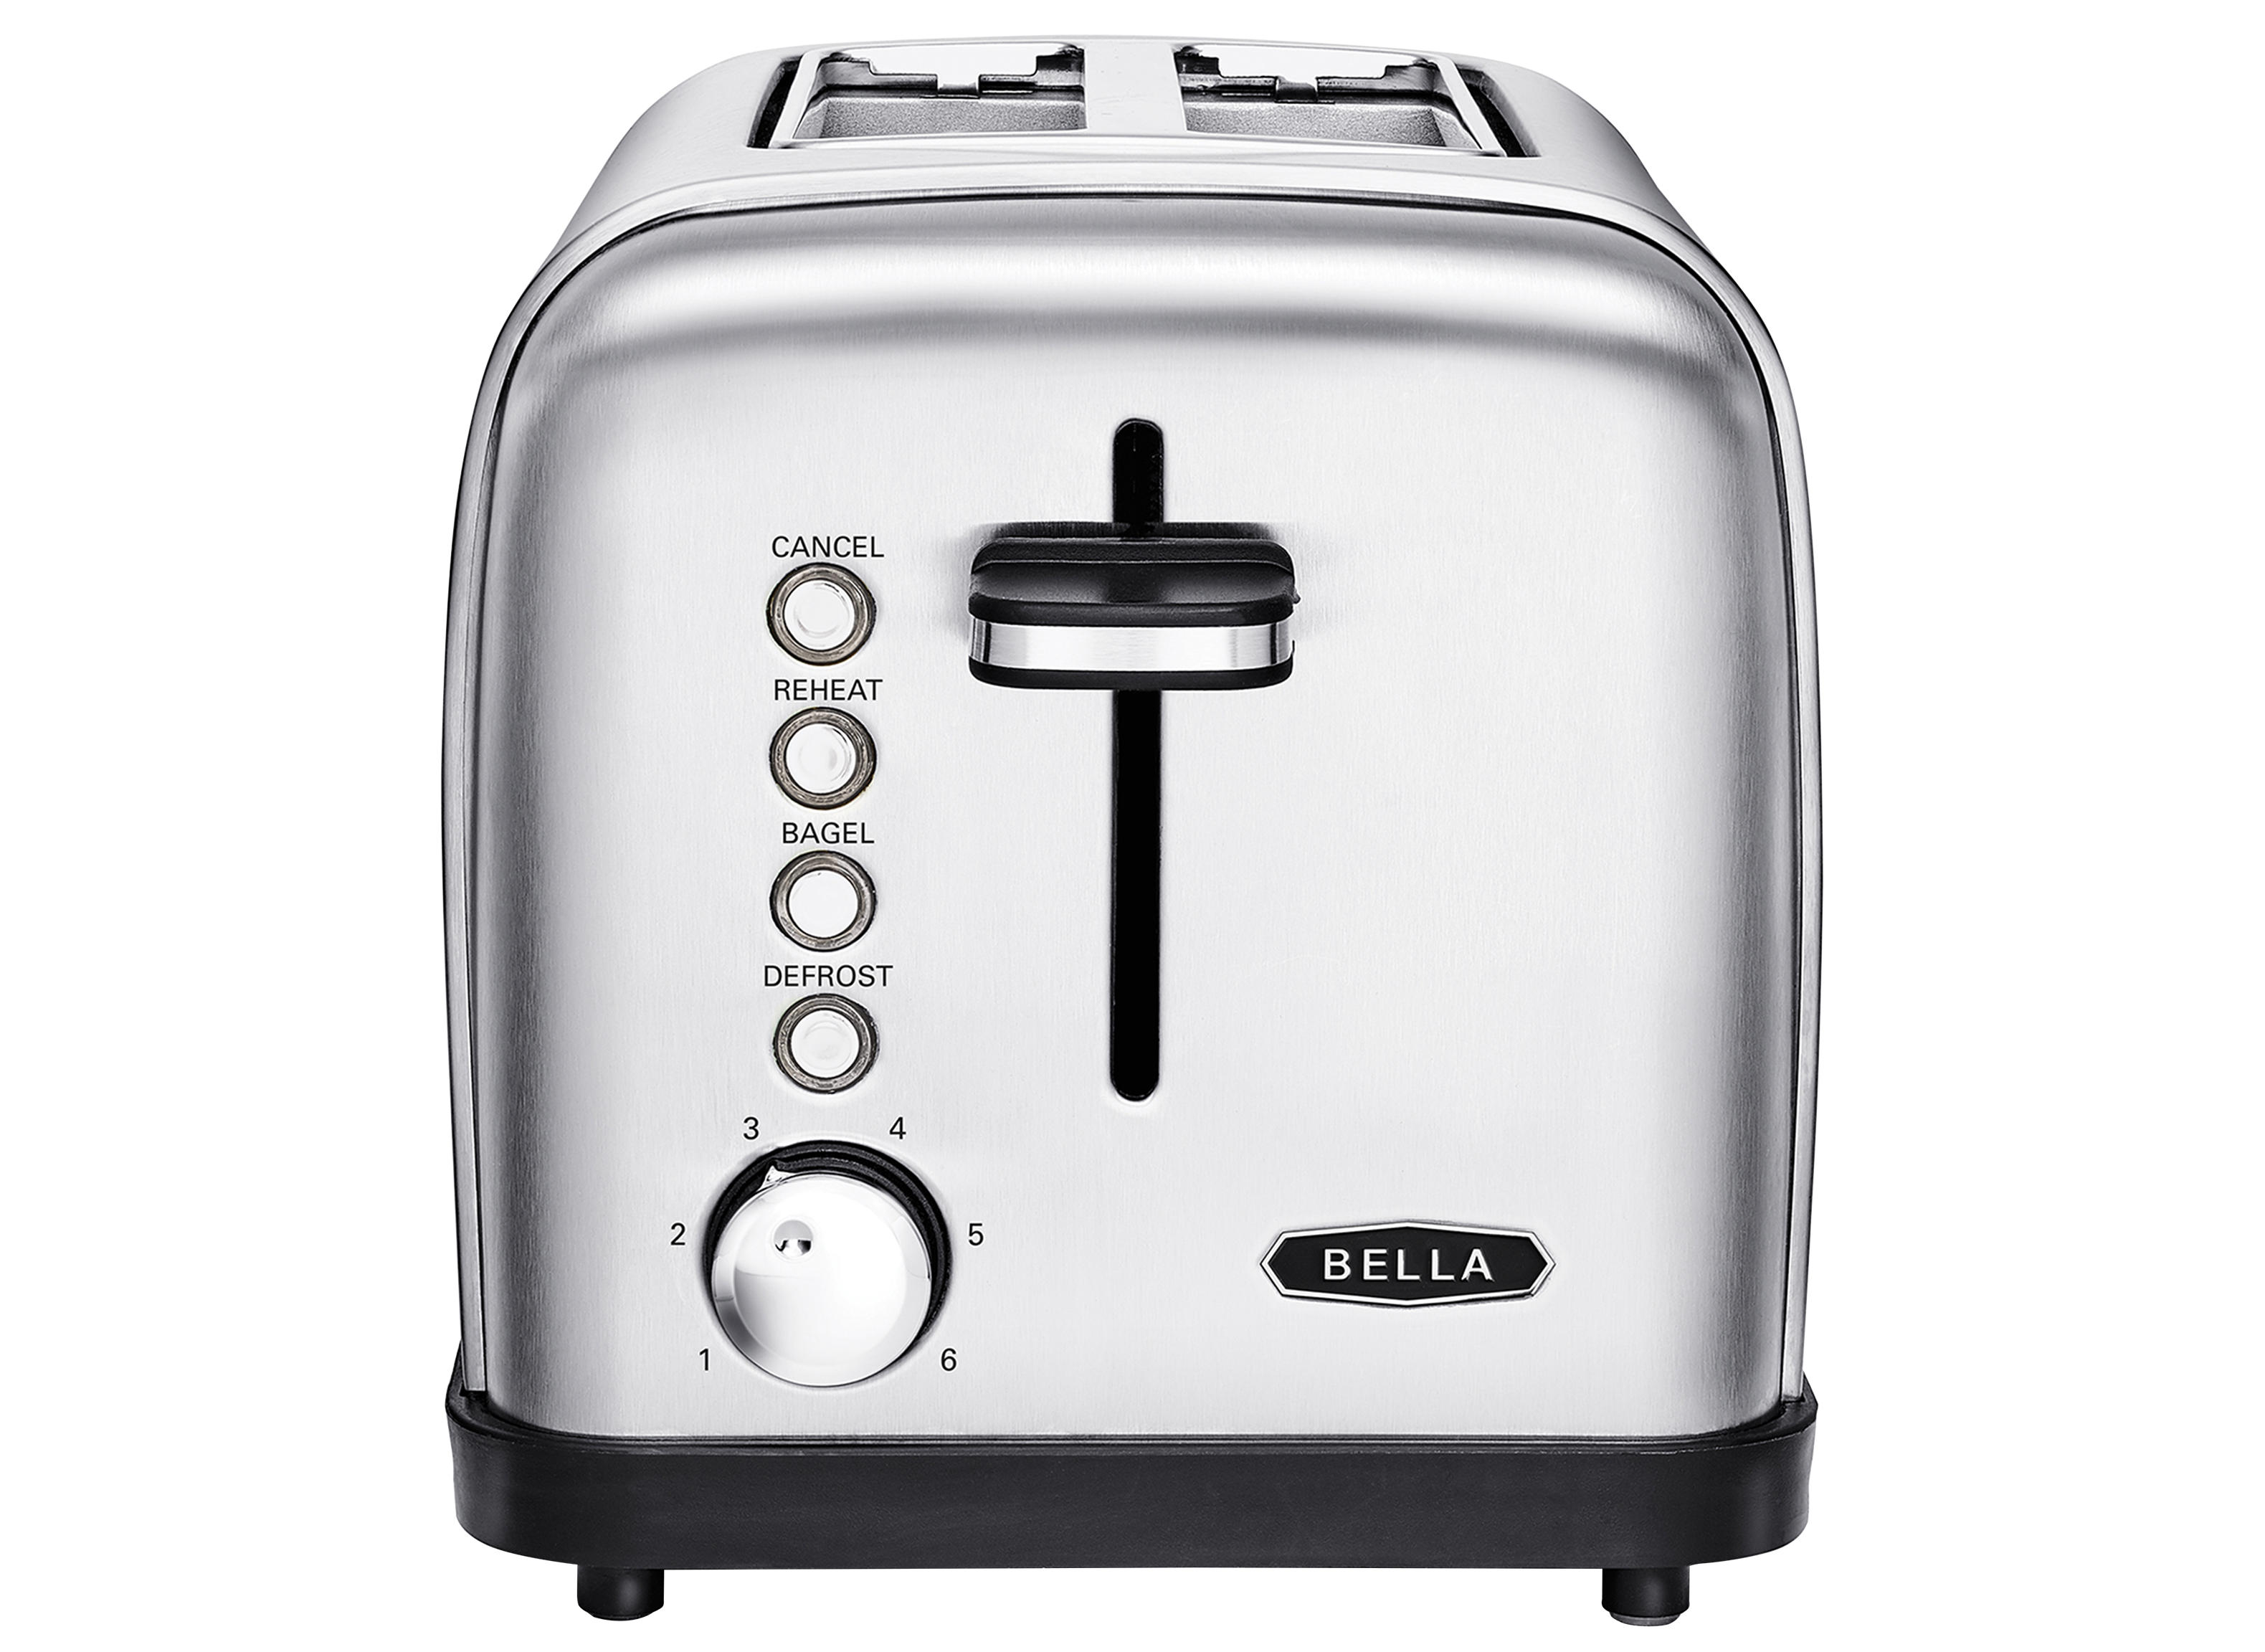 https://crdms.images.consumerreports.org/prod/products/cr/models/404768-2-slice-toasters-bella-classics-2-slice-wide-slot-toaster-bla14466-10023651.png